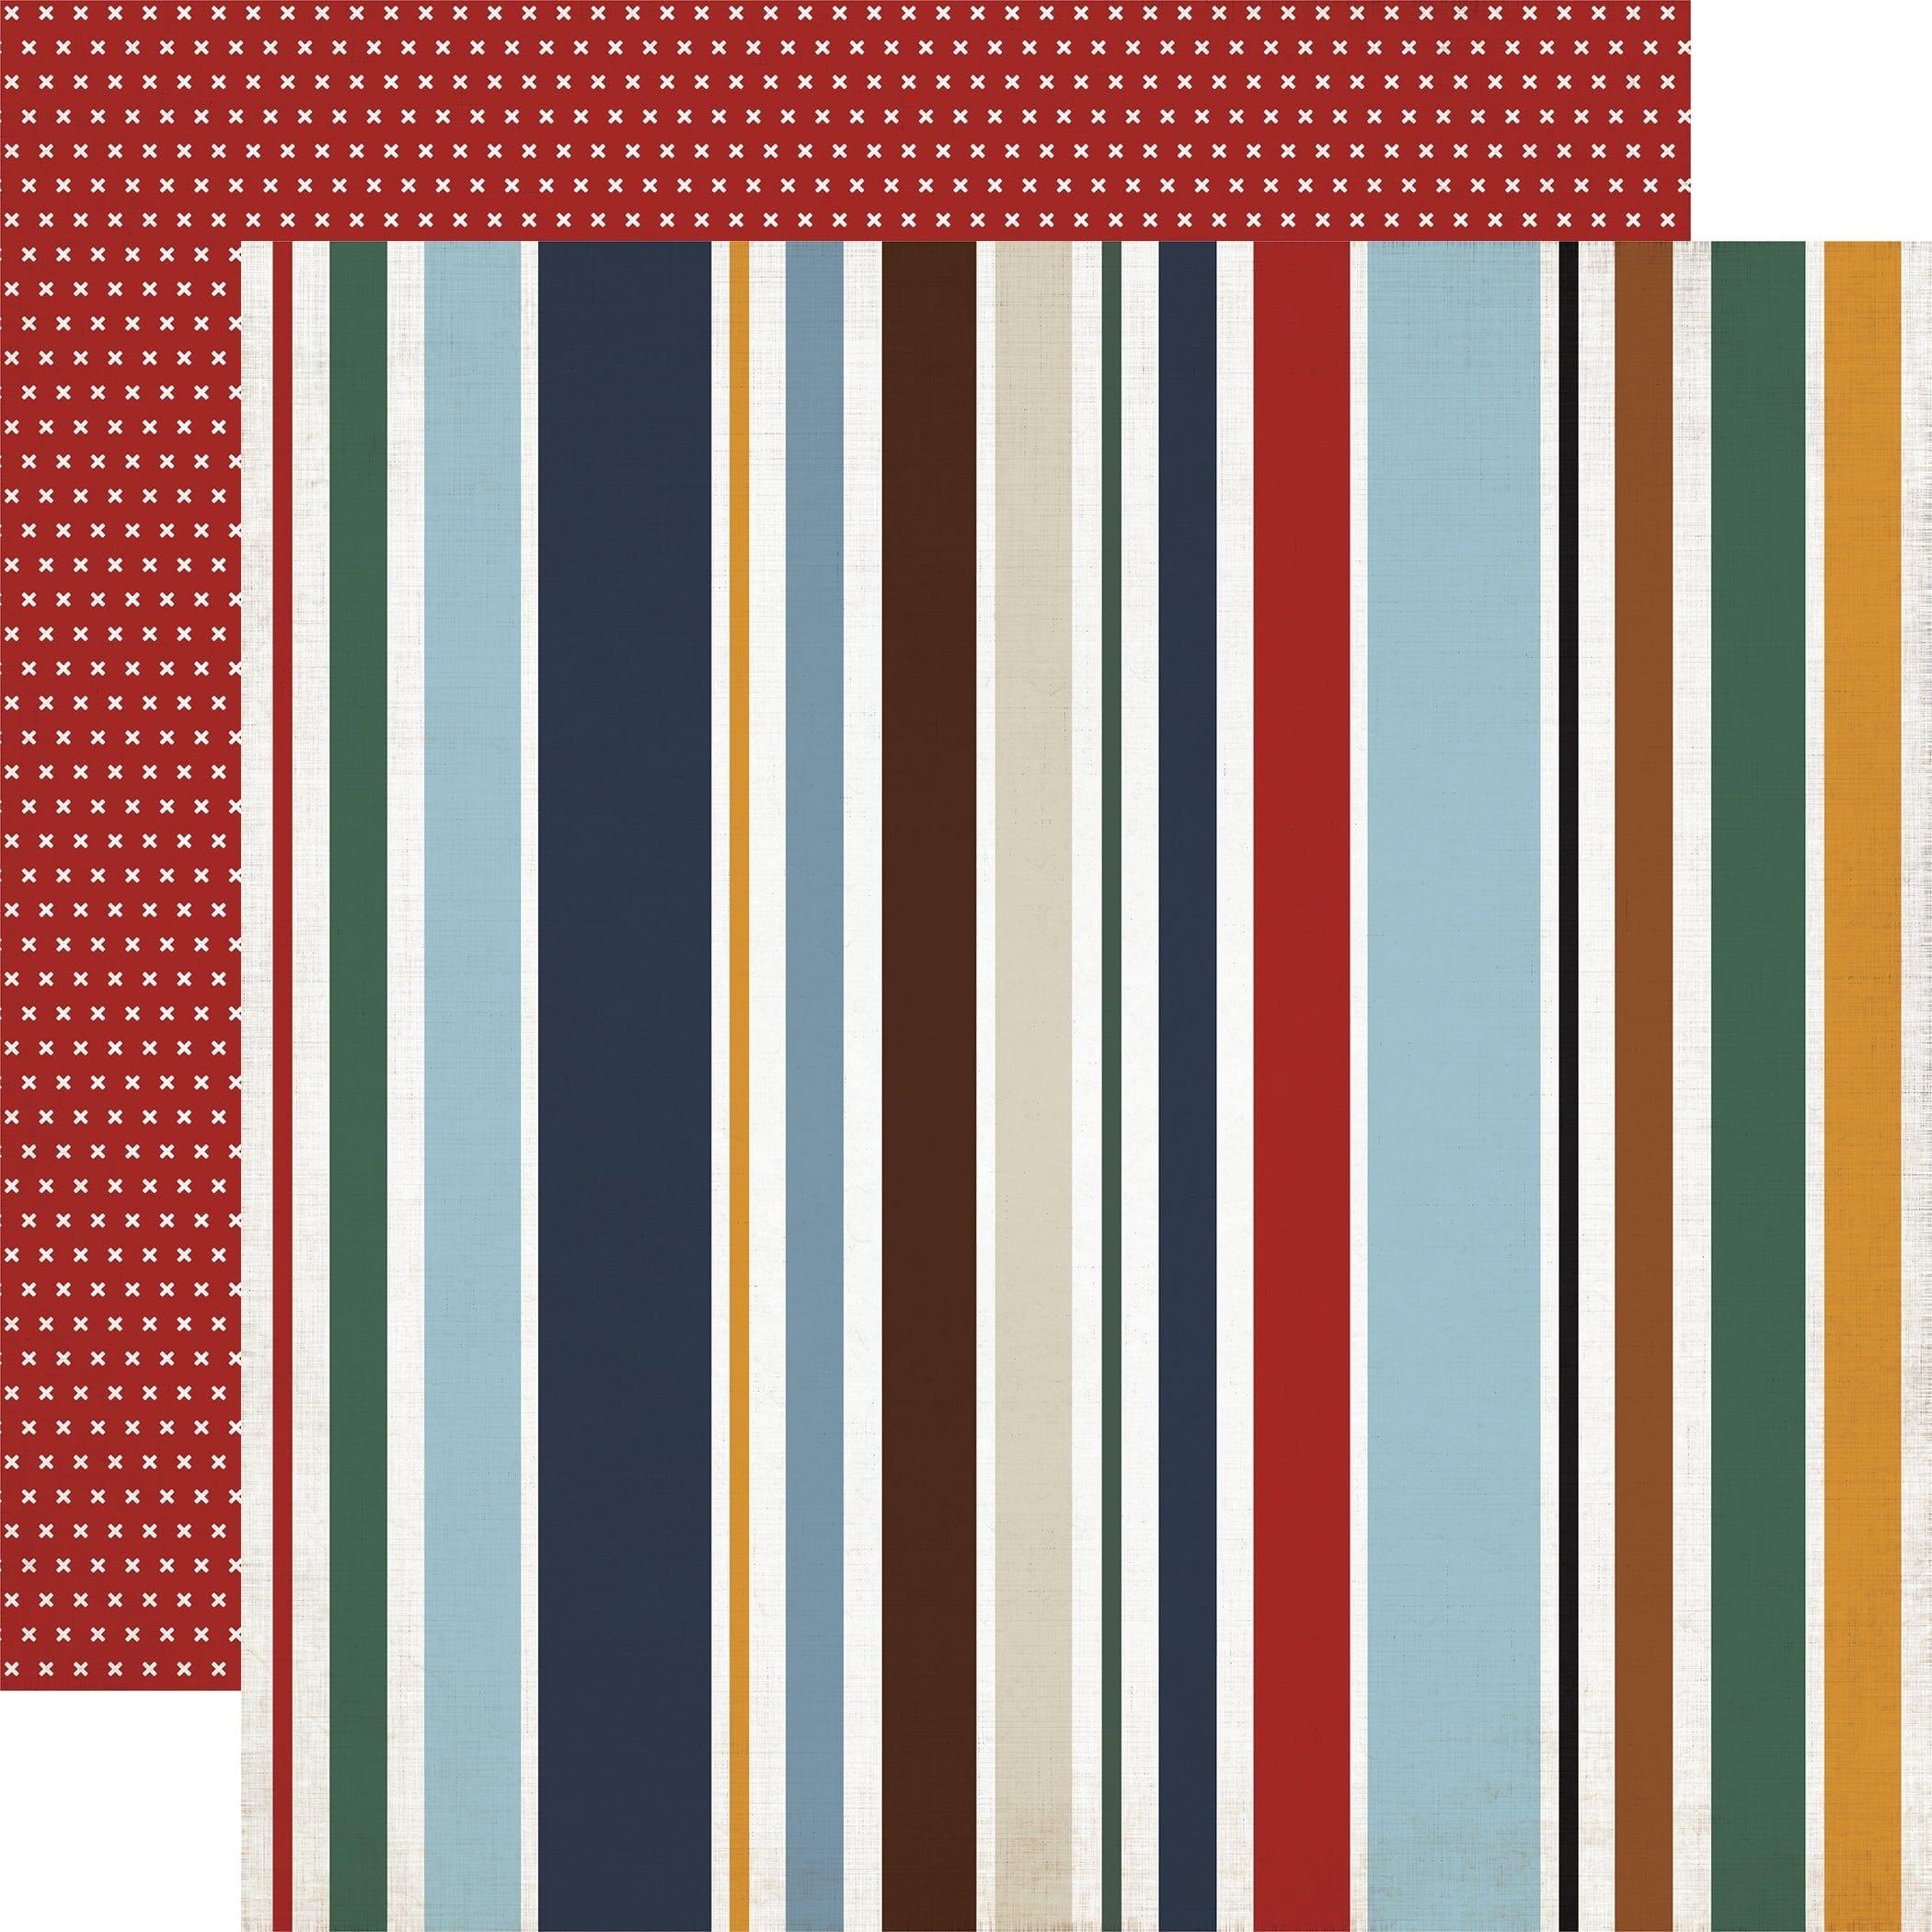 Let's Go Travel Collection Go See Do Stripes 12 x 12 Double-Sided Scrapbook Paper by Echo Park Paper